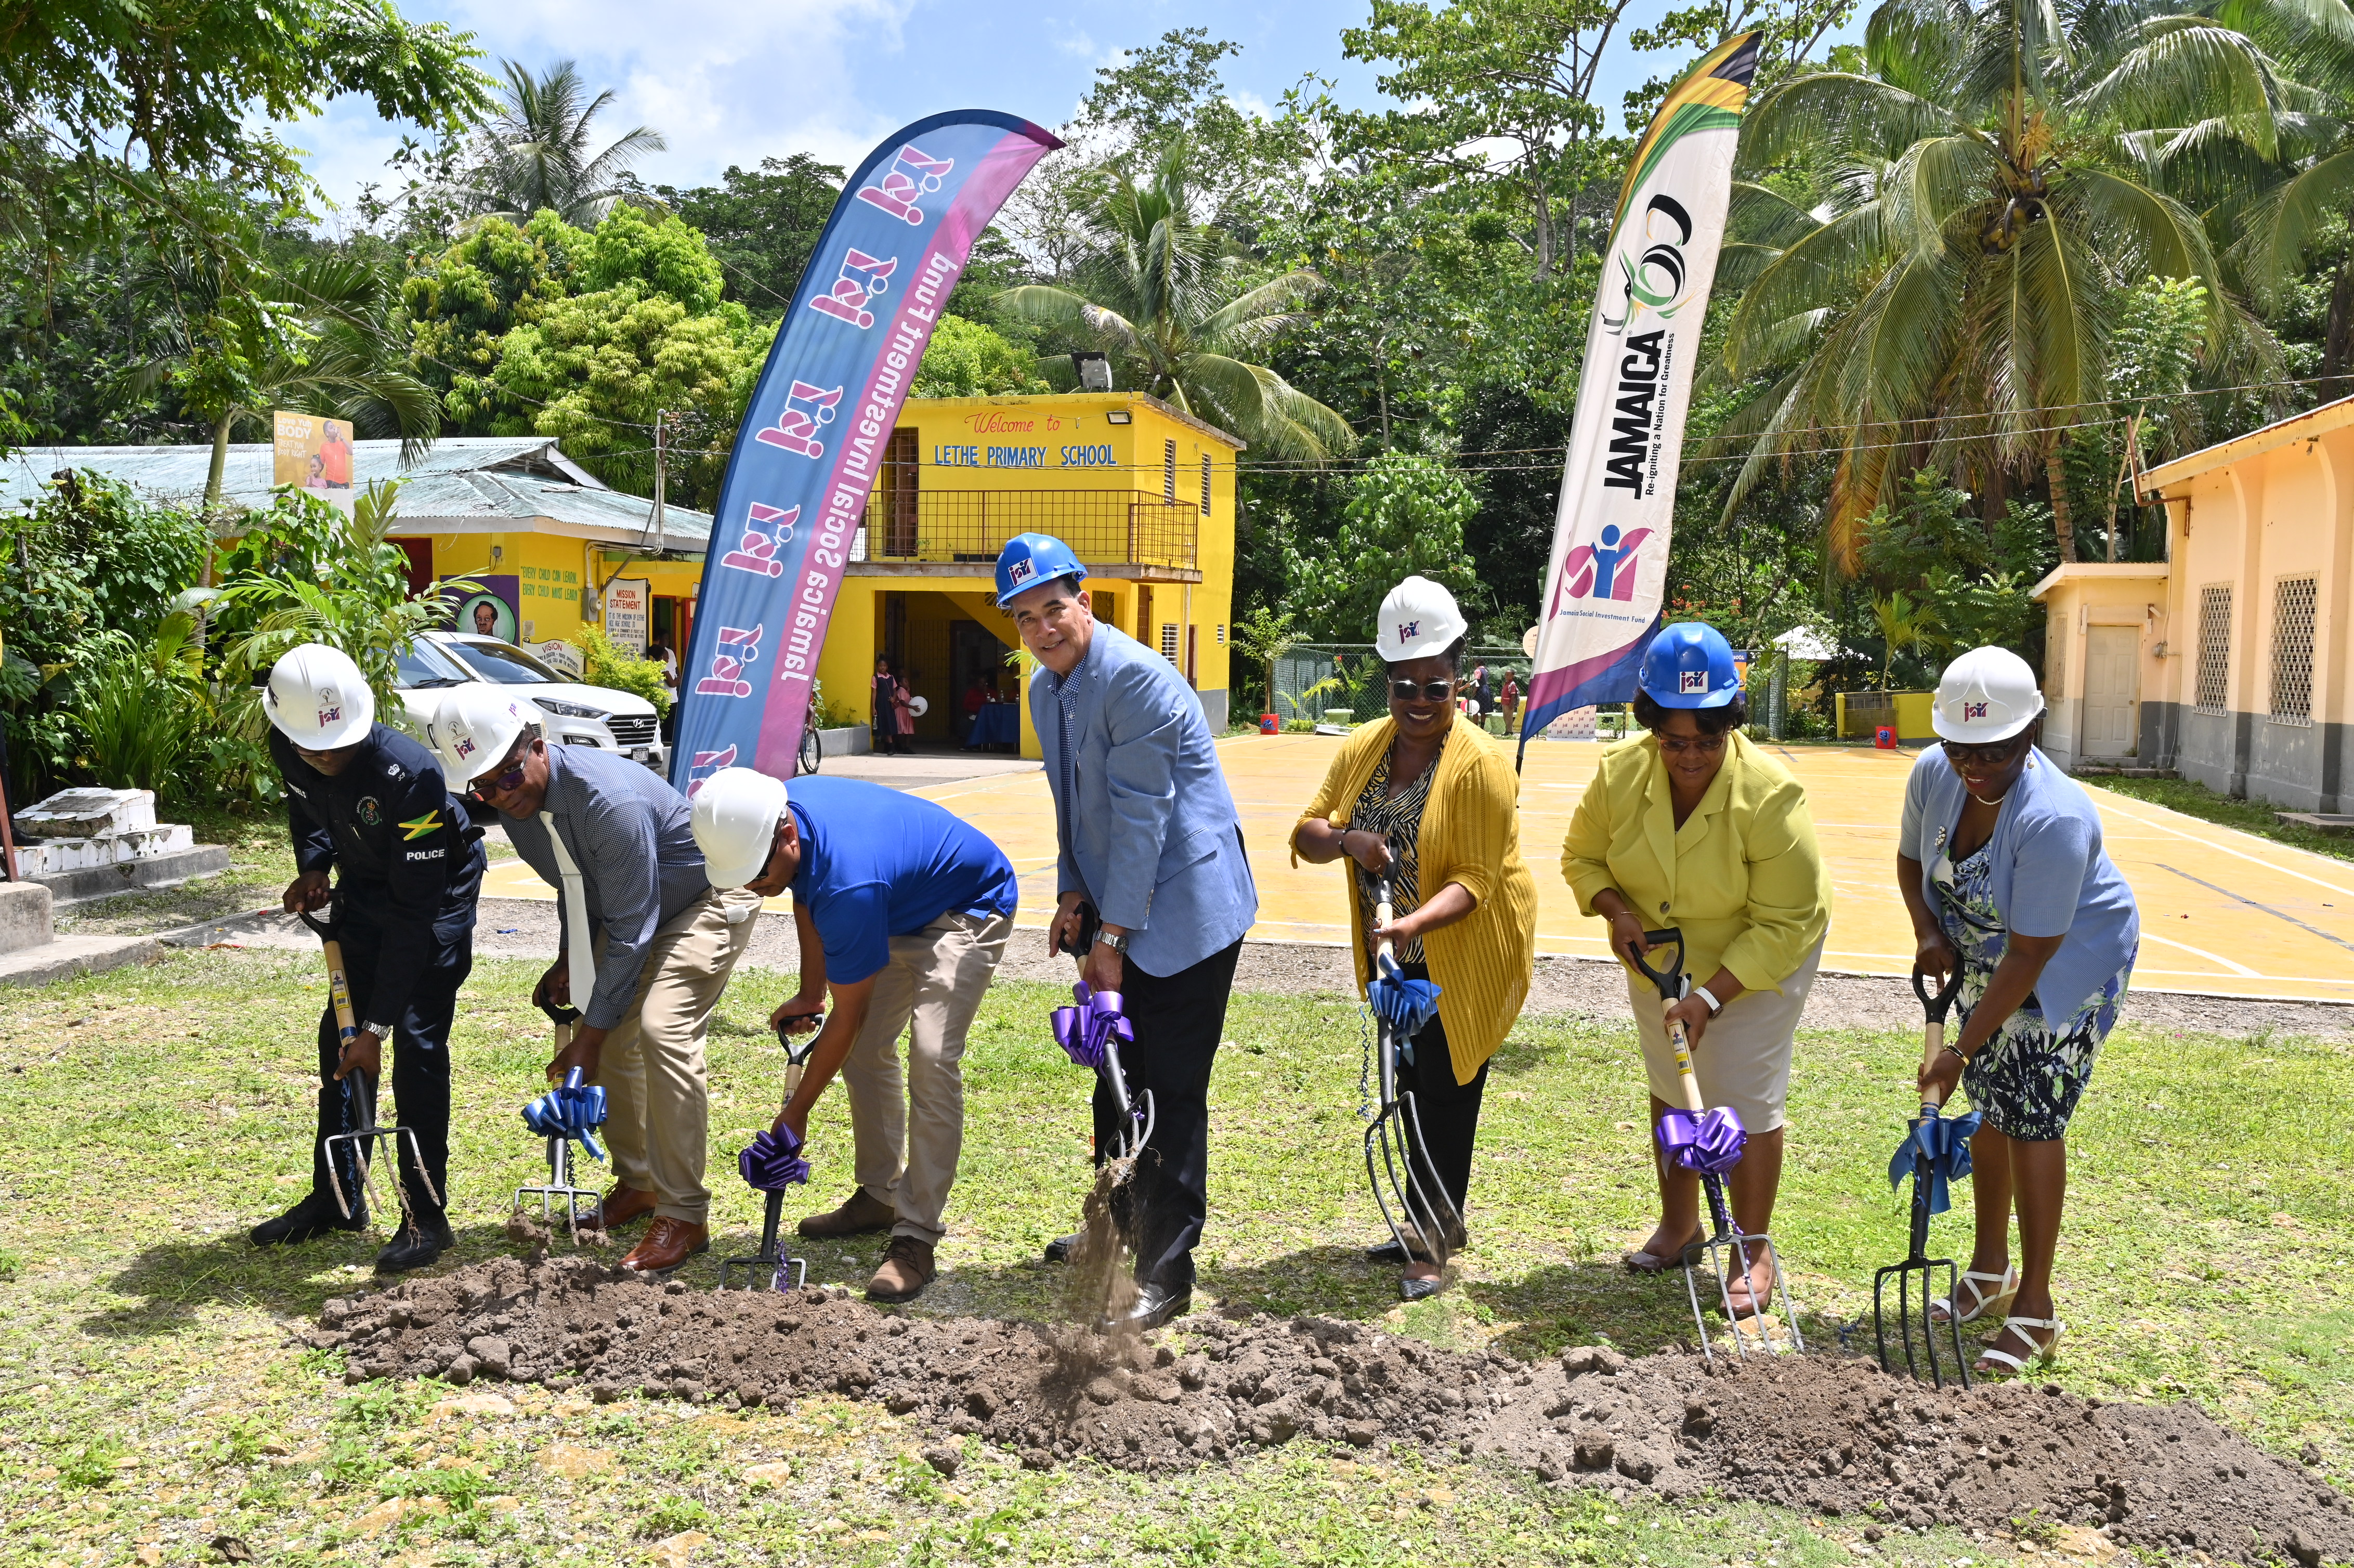 JSIF through its Integrated Community Development Project – Phase 2 (ICDP II), is providing $12.3 million to rehabilitate the sanitation block at the Lethe Primary & Infant School.